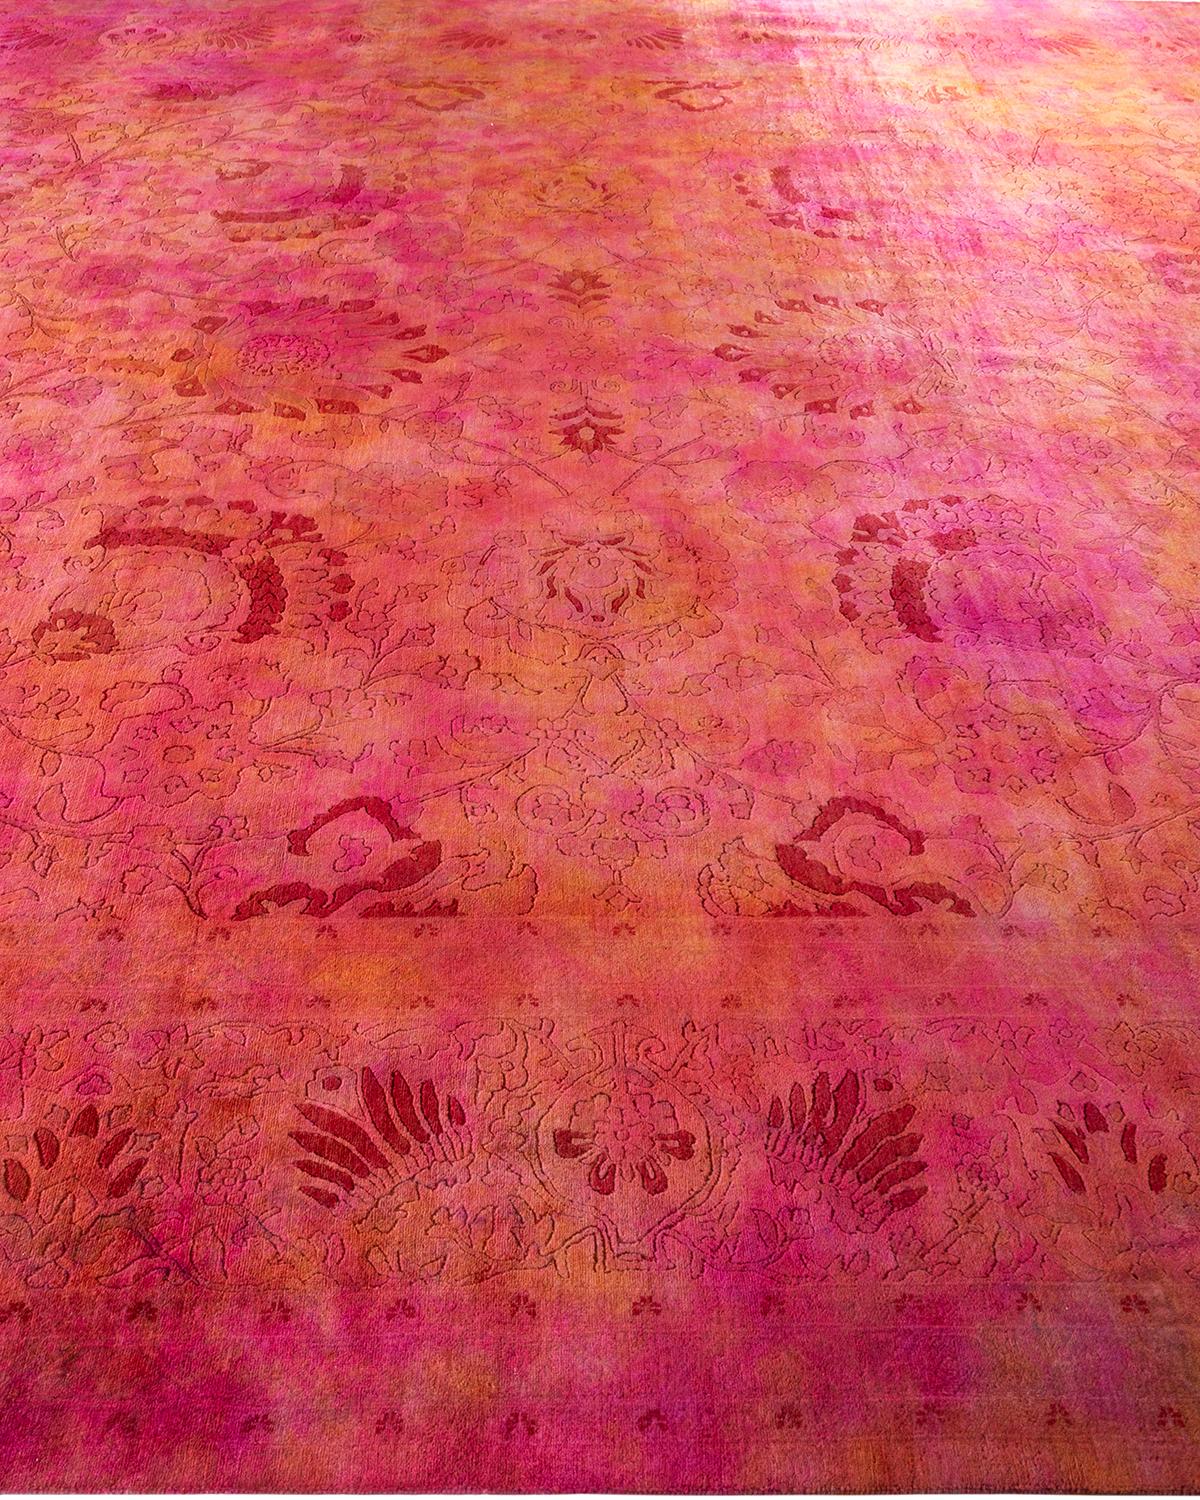 Overdyed Hand Knotted Wool Pink Area Rug In New Condition For Sale In Norwalk, CT